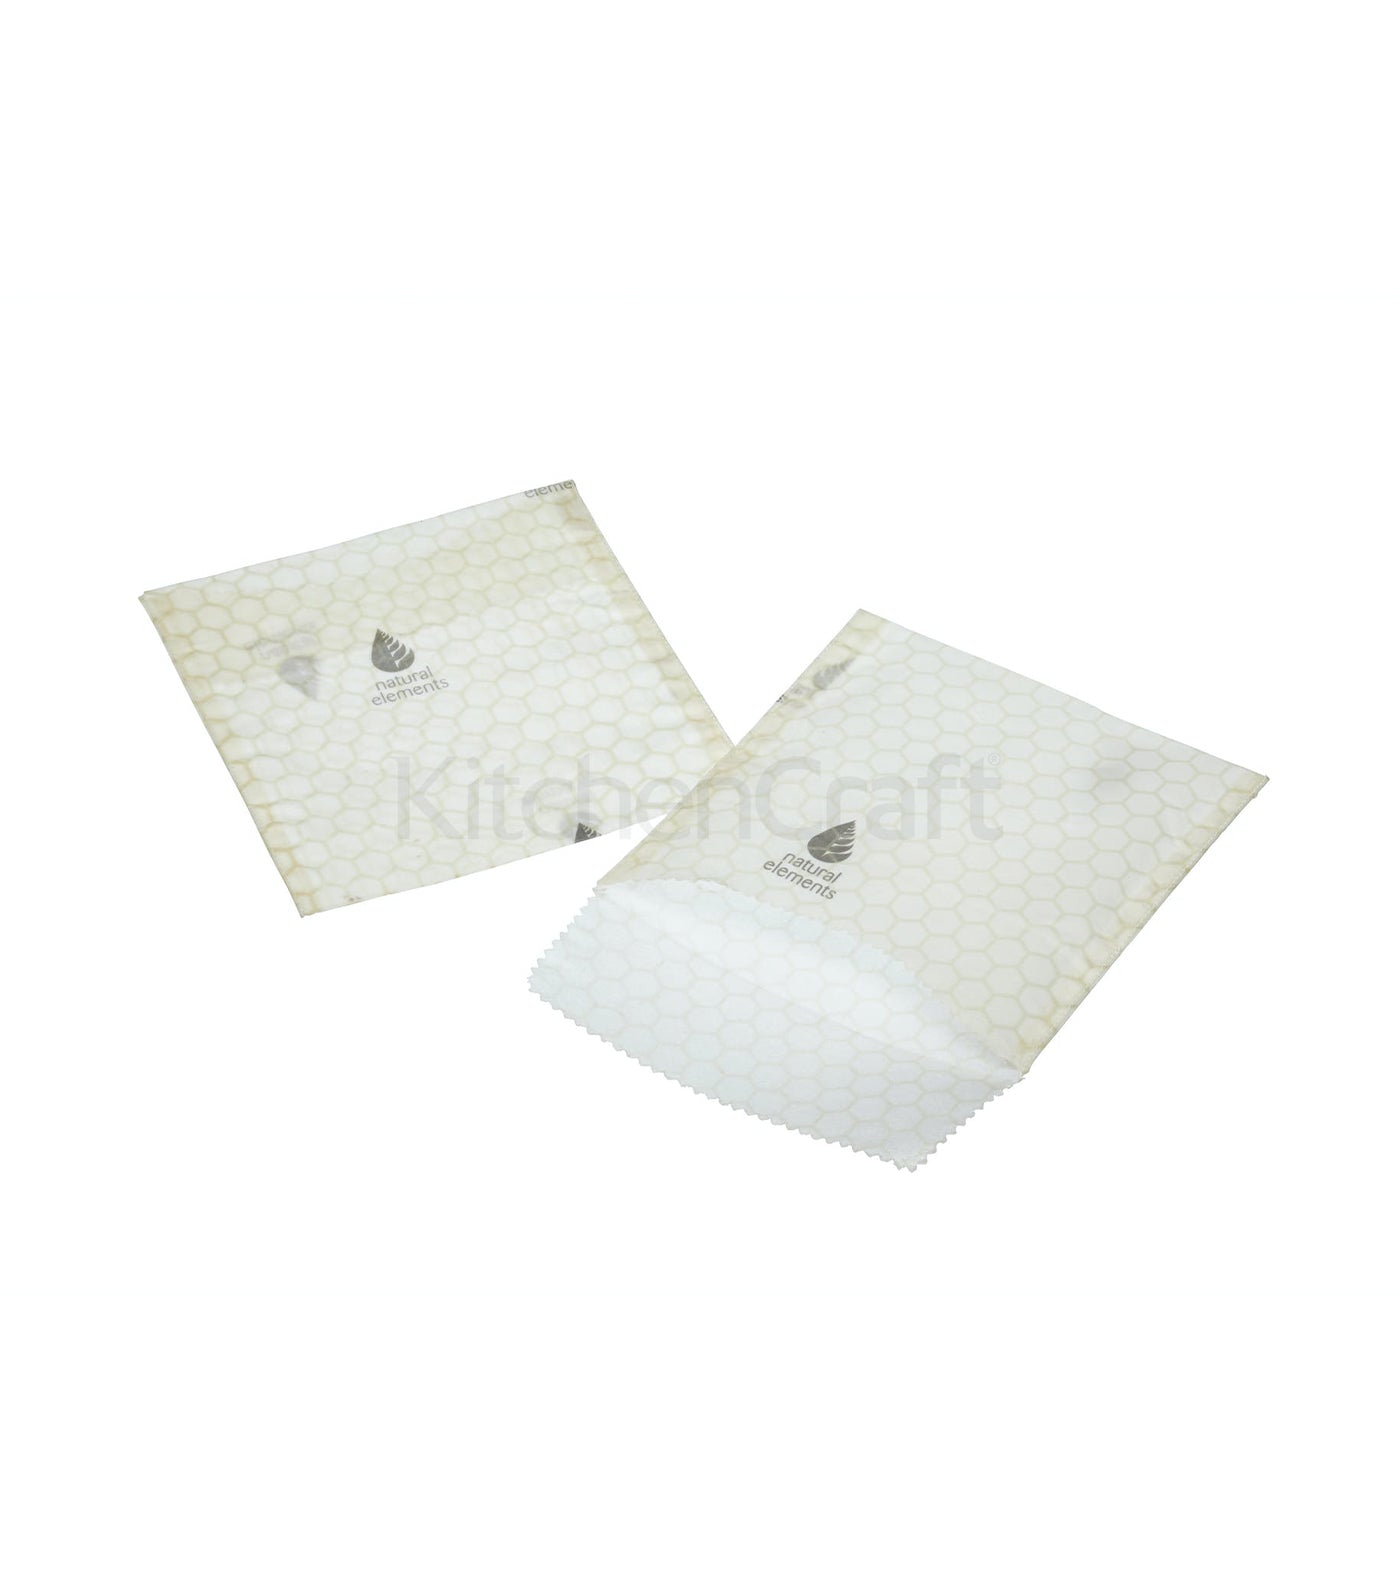 Elements Eco-Friendly Set of Two Beeswax Sandwich Bags